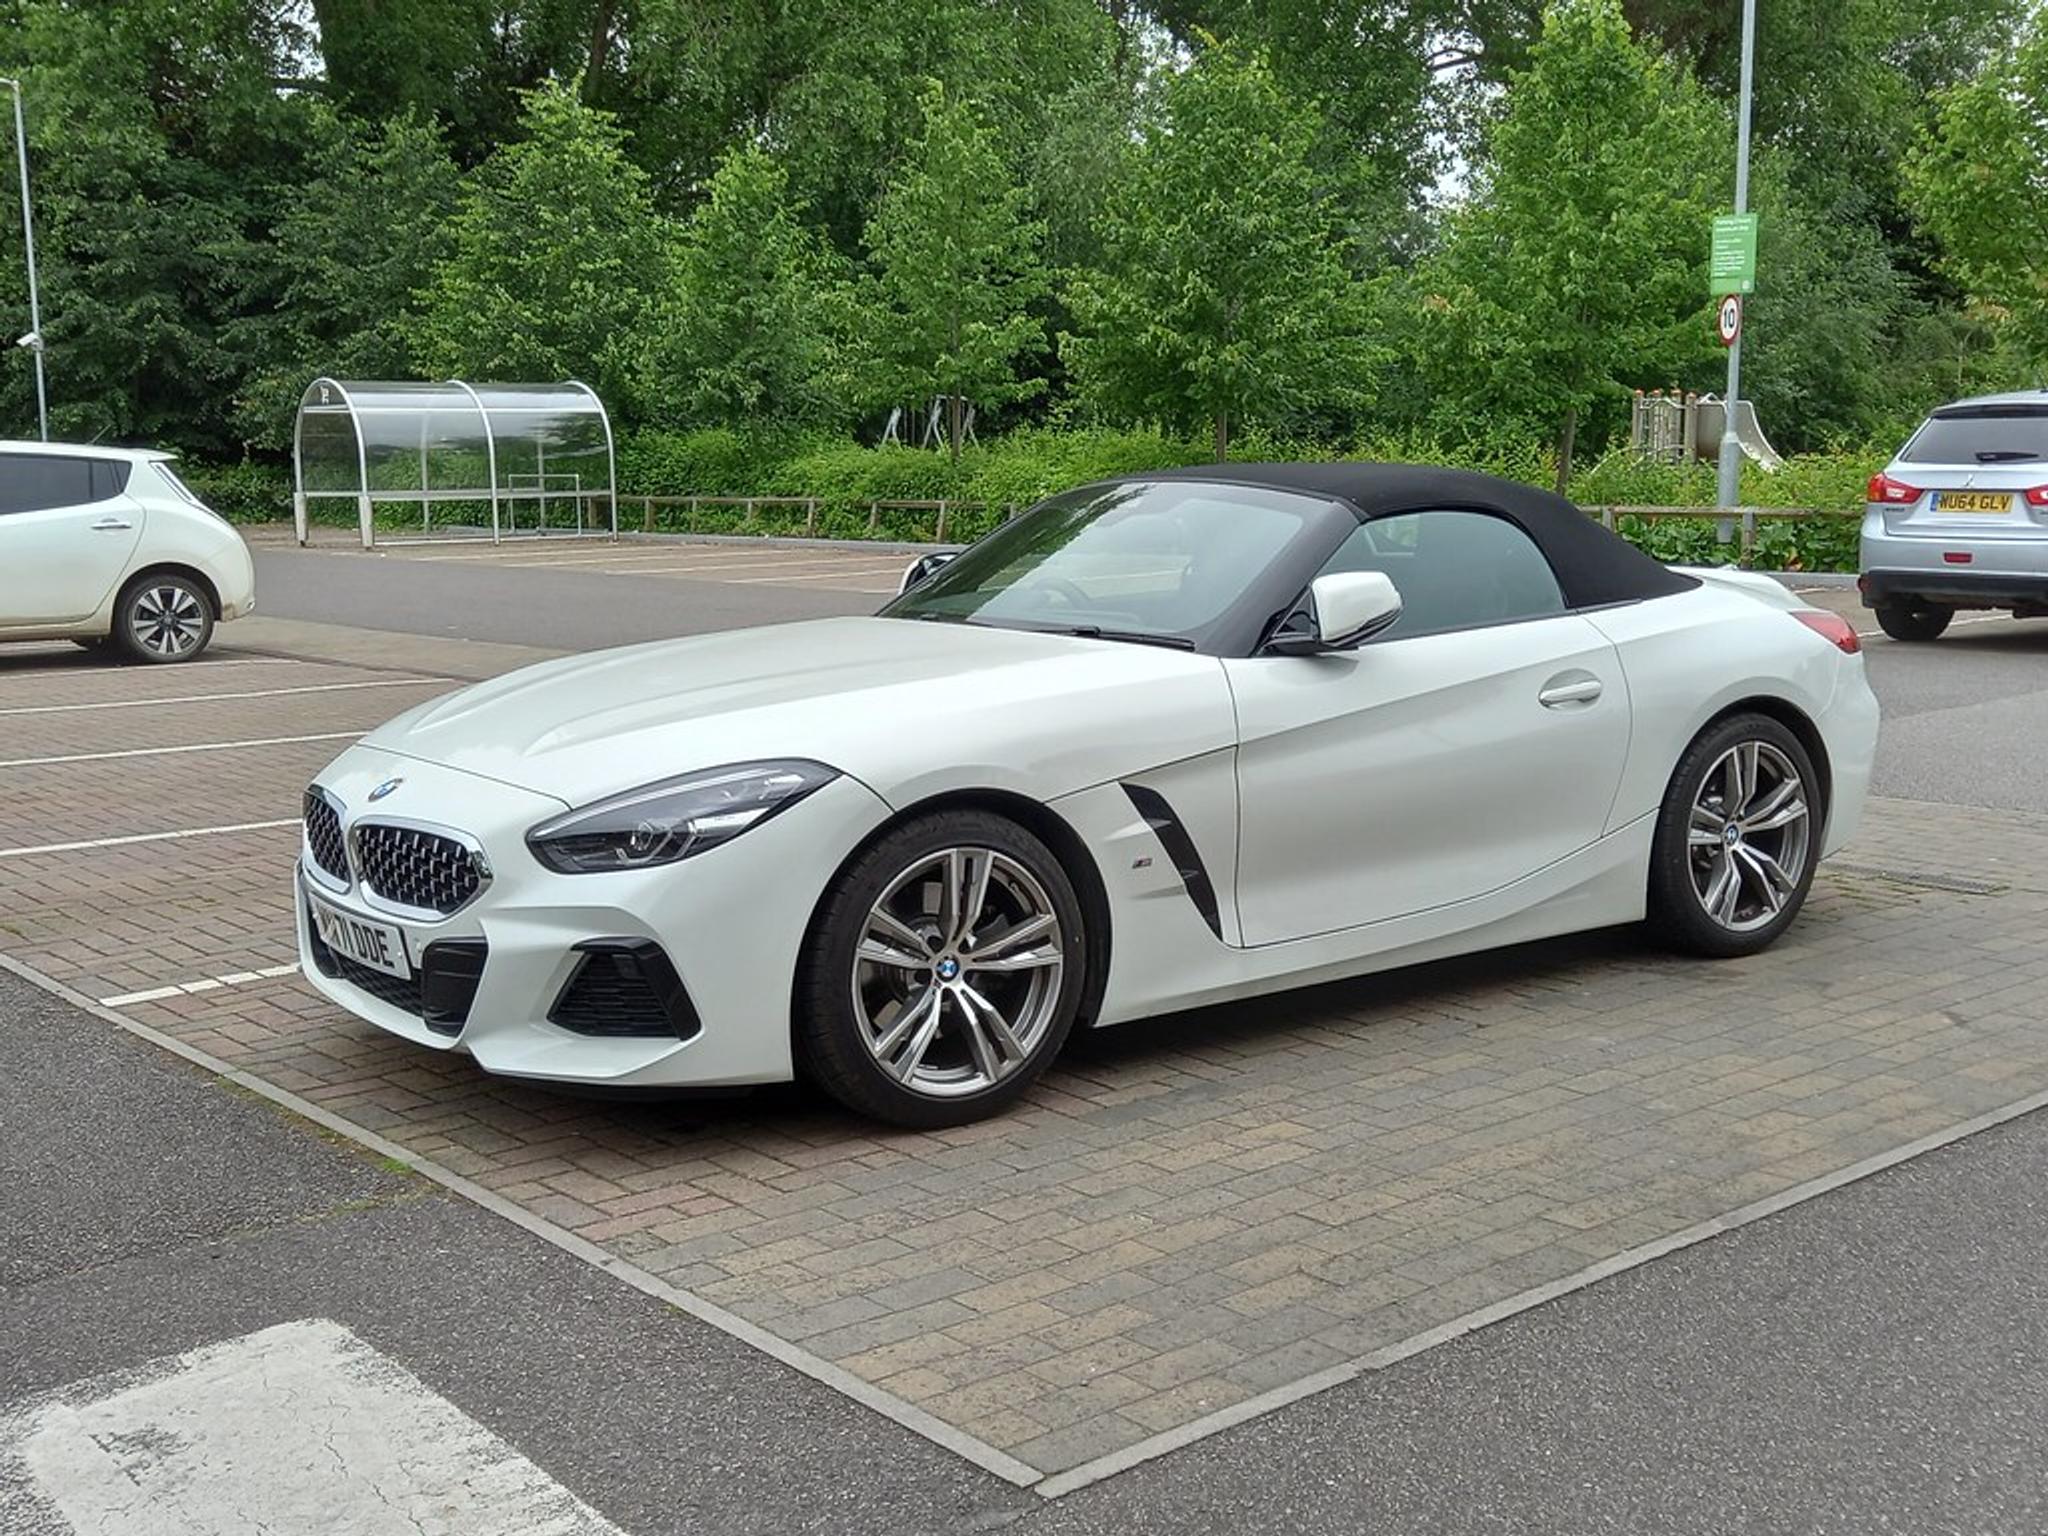 White BMW Z4 convertible in a parking lot